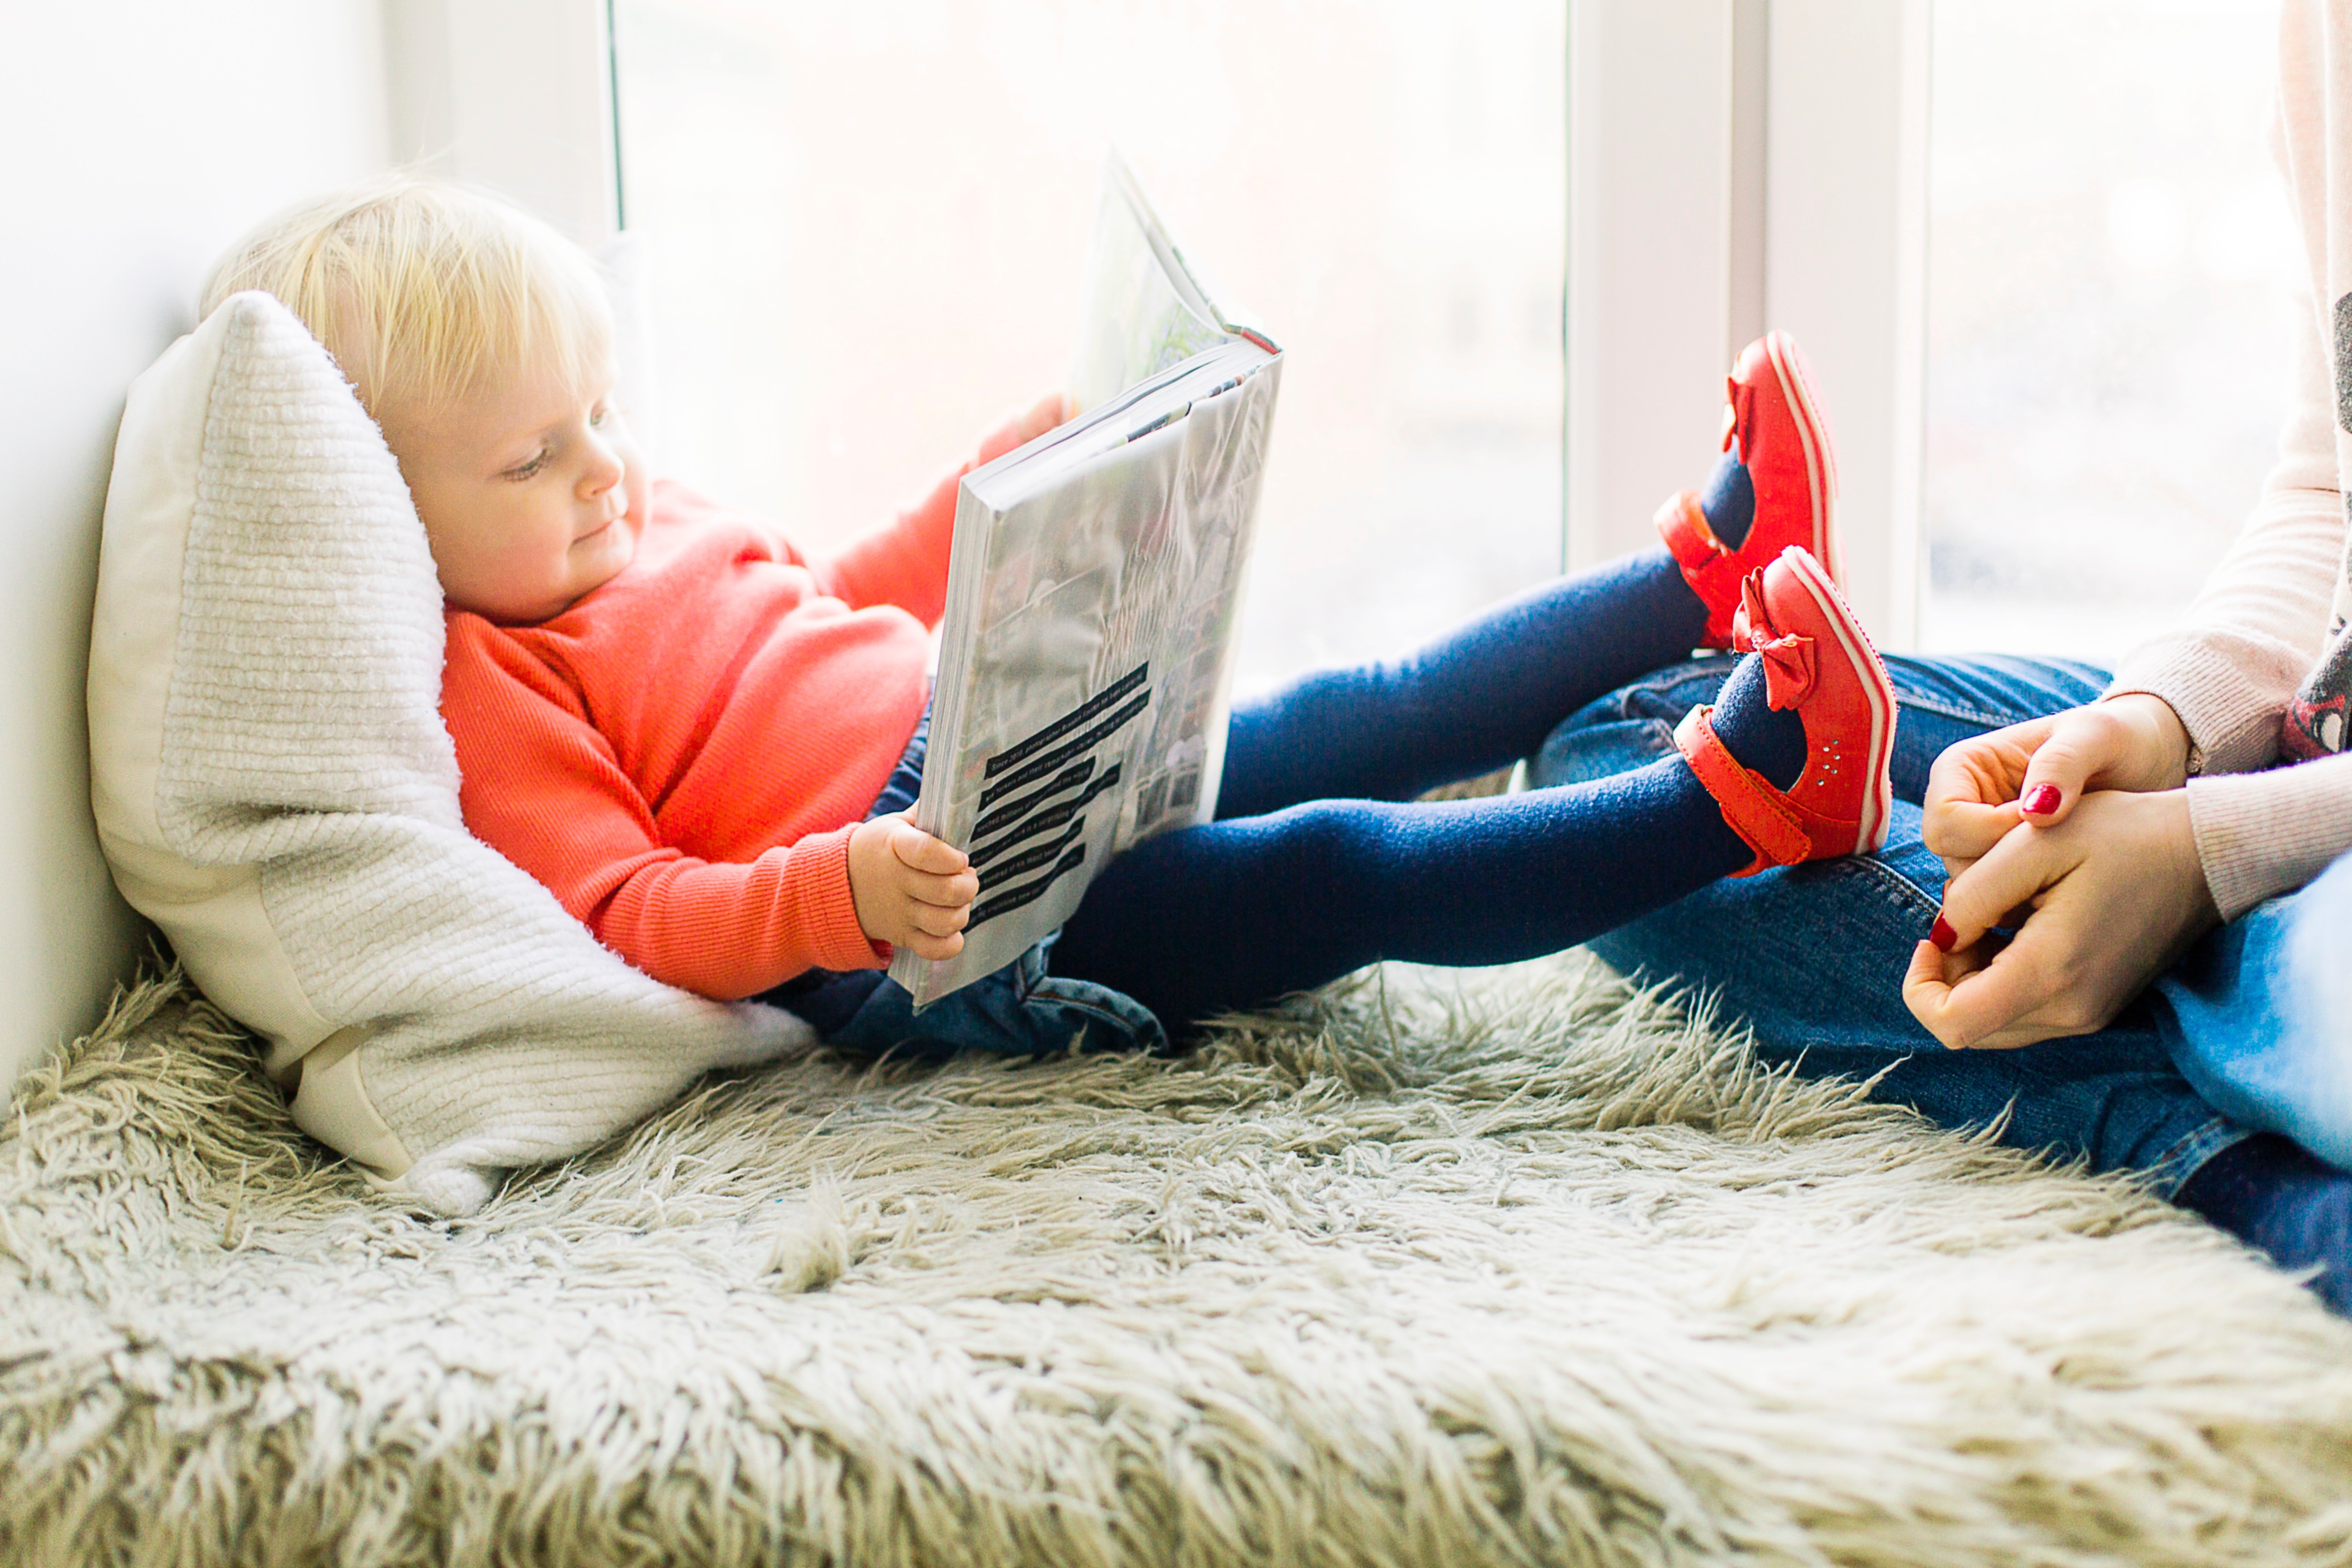 The Best Books For Toddlers That You’ll Want To Read Again and Again